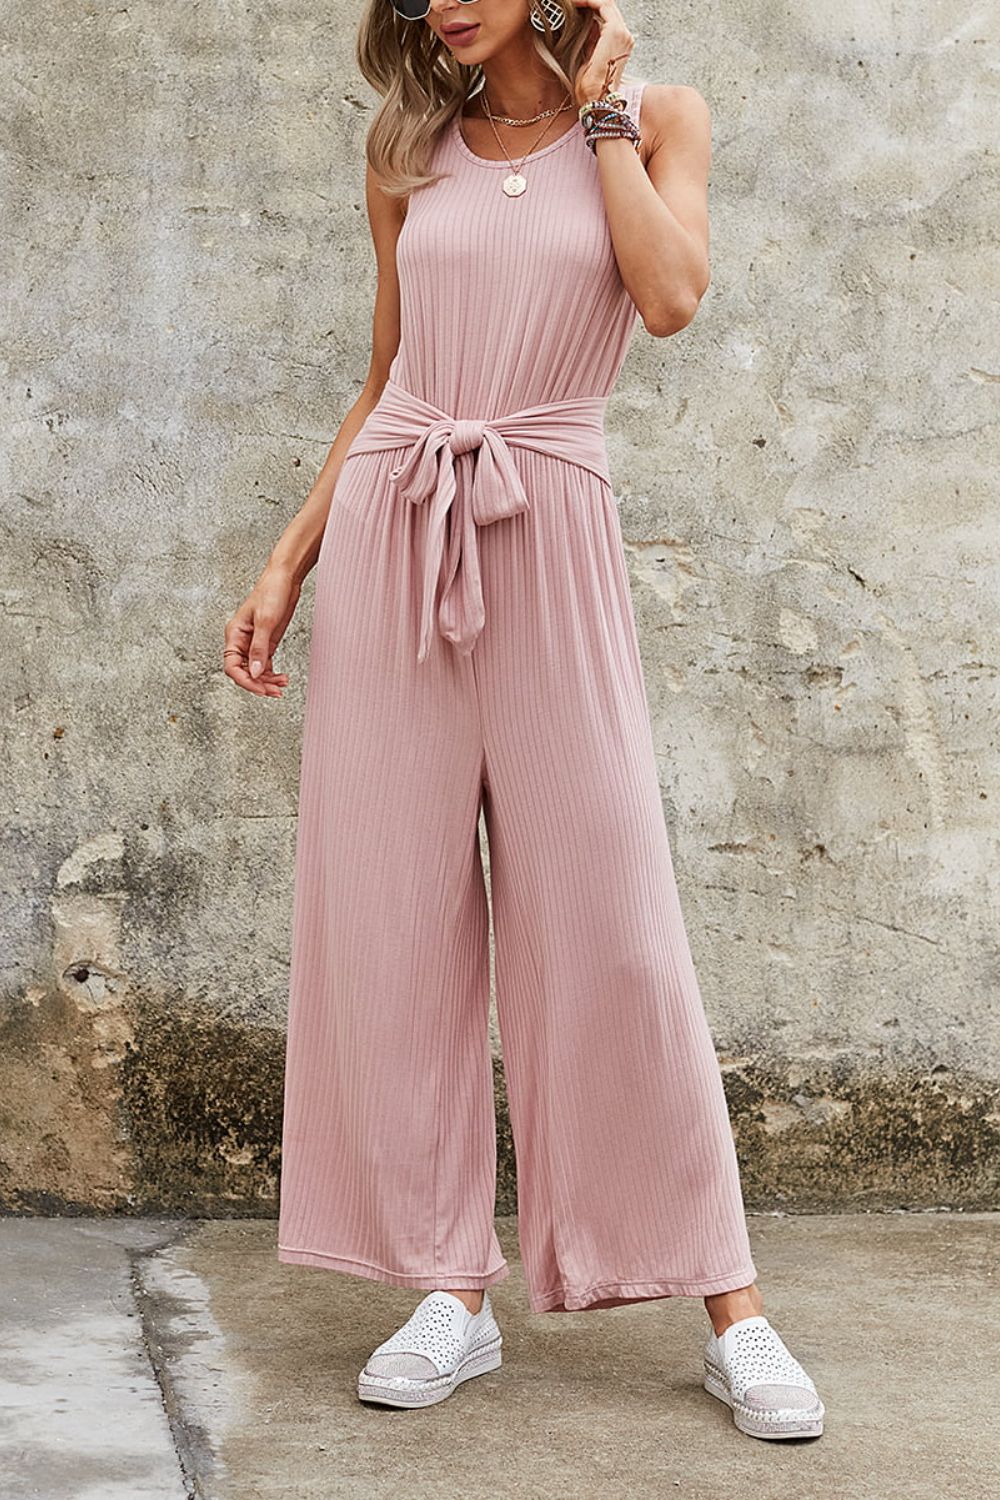 Ribbed Scoop Neck Tie Waist Sleeveless Jumpsuit  Sunset and Swim Dusty Pink S 